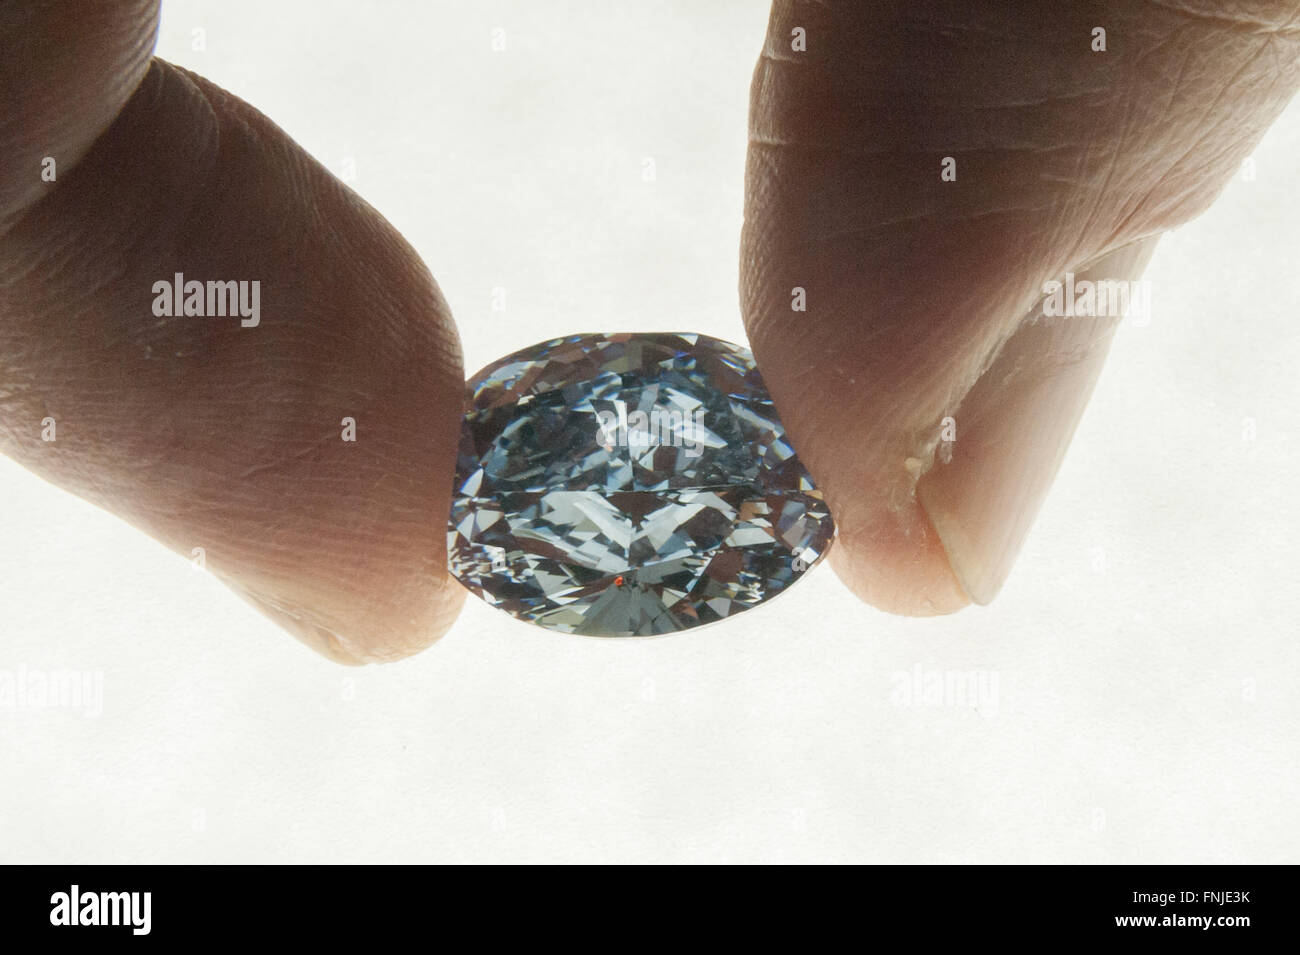 London, UK.  15 March 2016.  The ‘De Beers Millennium Jewel 4’, a rare and superb oval internally flawless fancy vivid blue diamond weighing 10.10 carats is displayed at Sotheby's in New Bond Street ahead of its auction in Hong Kong on 5 April.  It is the largest oval fancy vivid blue diamond ever to appear at auction (Est. HK$235 – 280 million / US$30 – 35 million) and is the only oval-shaped stone among the twelve rare diamonds - eleven blue and one colourless – that form the world-renowned De Beers Millennium Jewels collection. Credit:  Stephen Chung/Alamy Live News Stock Photo